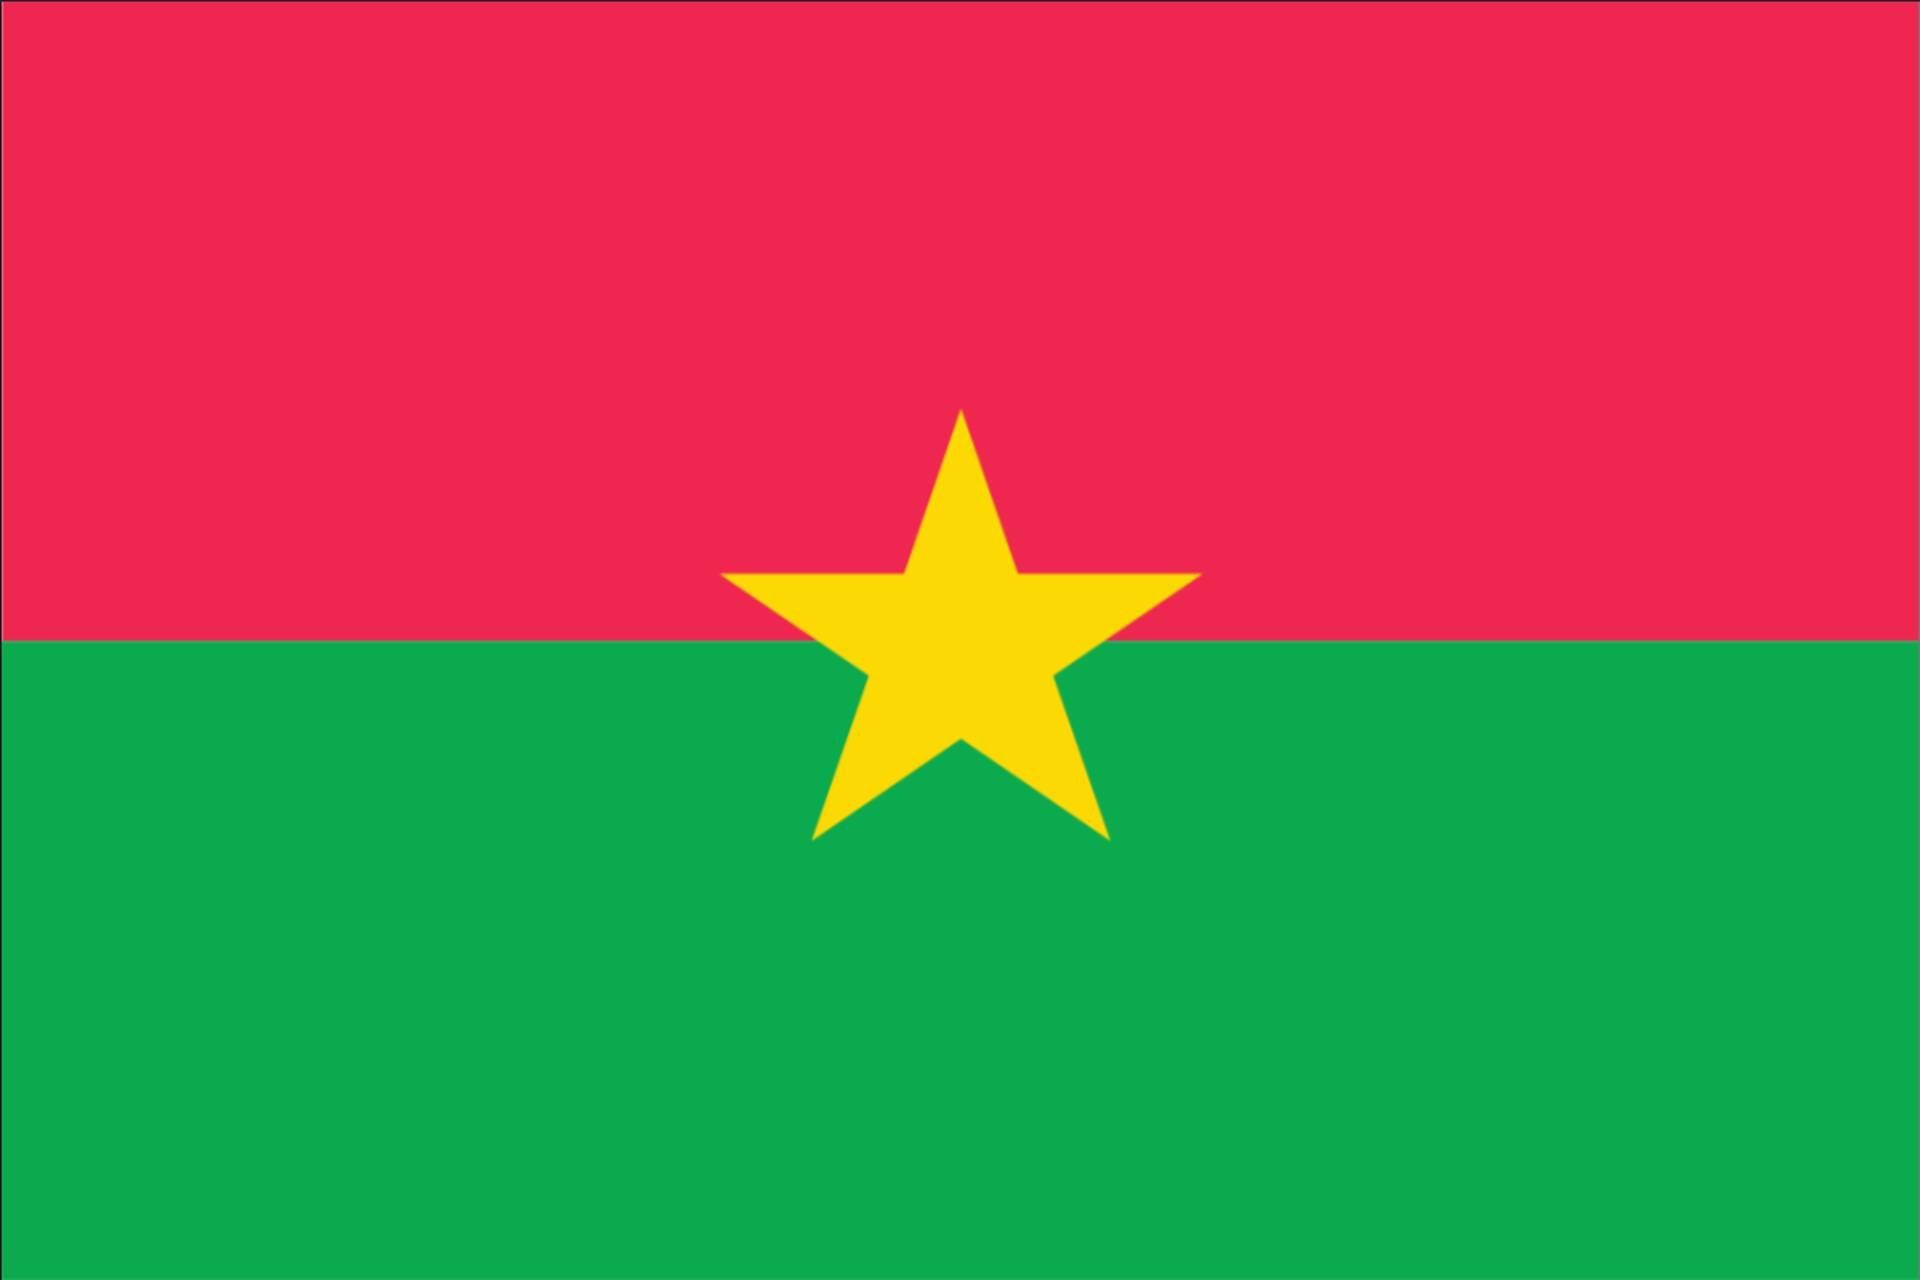 120 Querformat Faso g/m² Burkina flaggenmeer Flagge